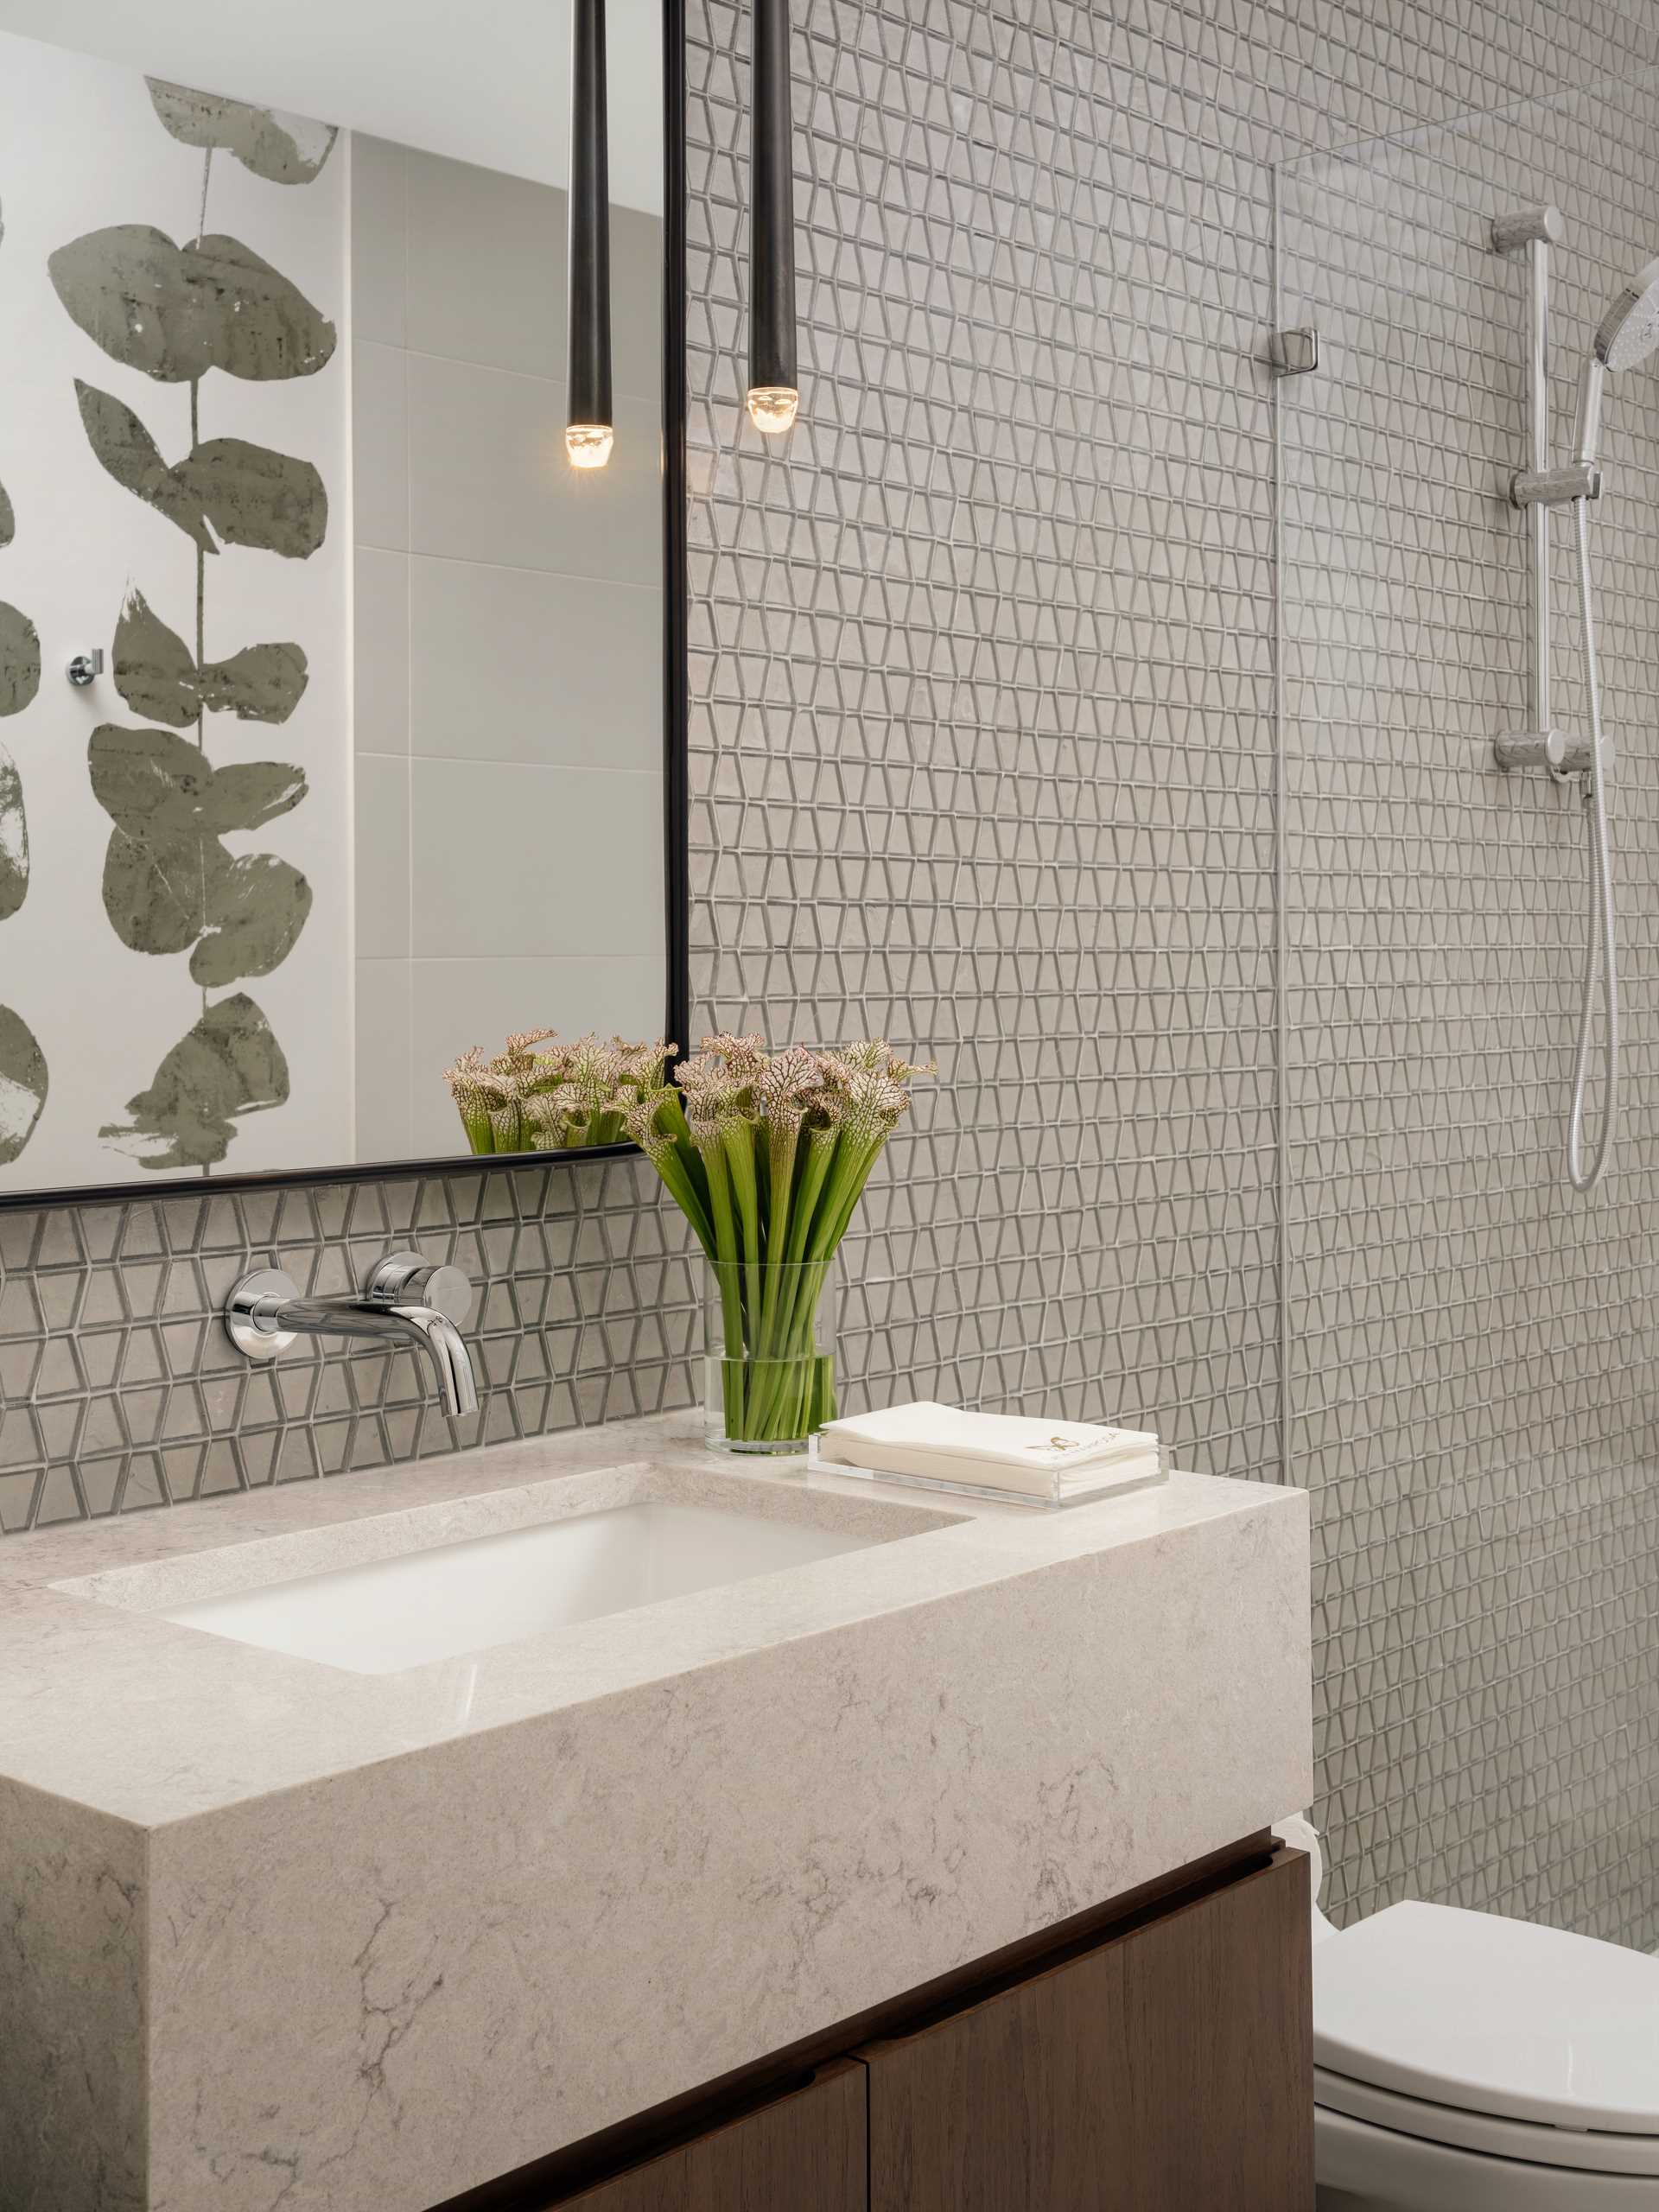 In this modern bathroom, small tiles with a trapezoid shape line the wall.